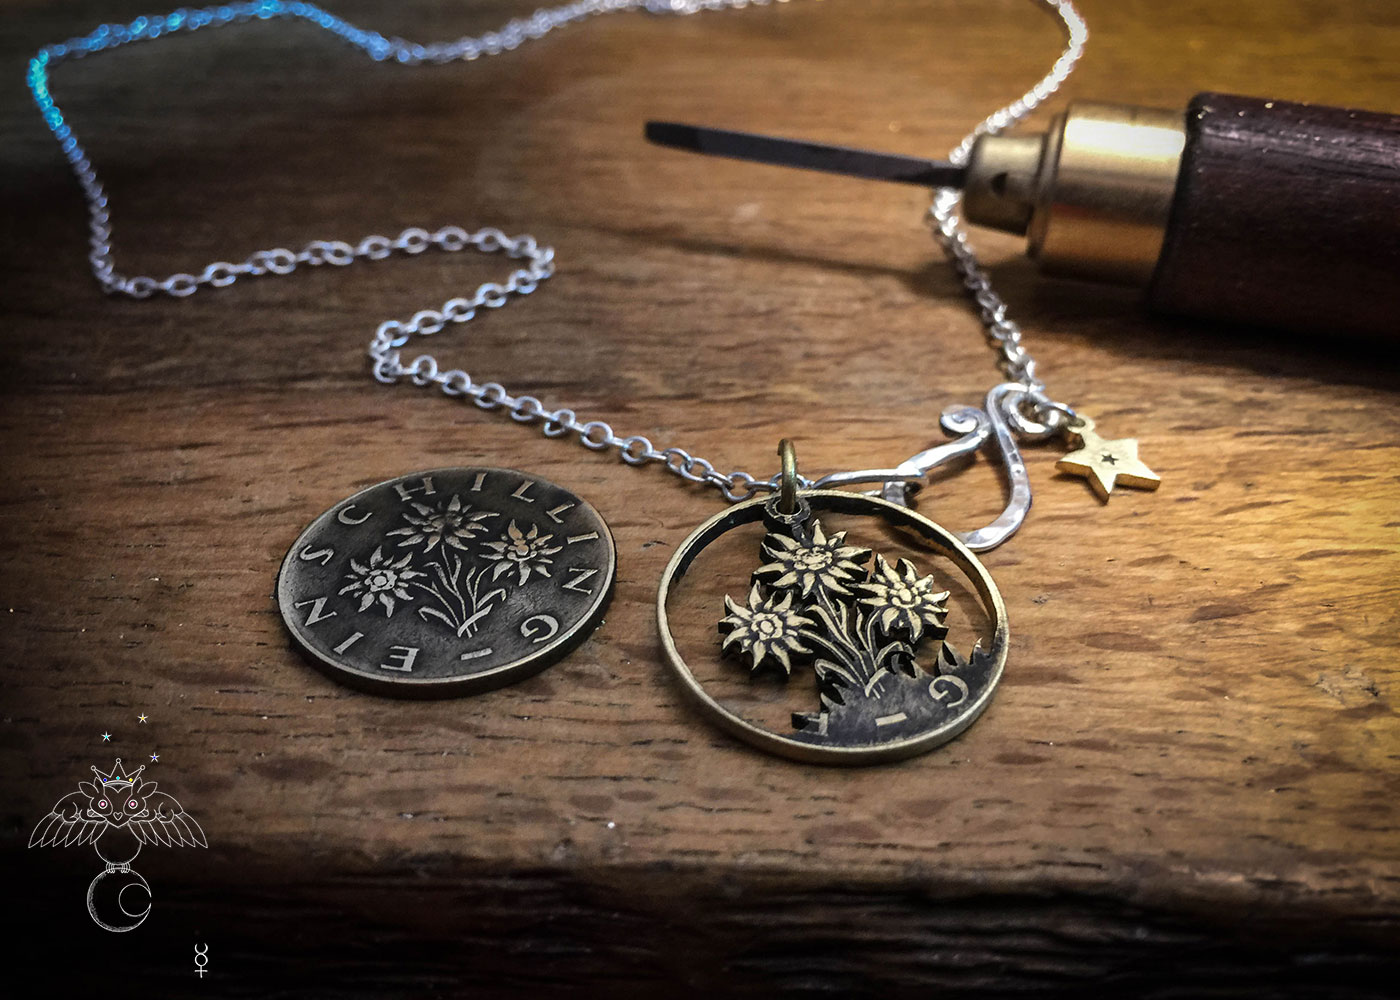 Edelweiss coin jewellery - necklace pendant handmade and recycled Austrian Shilling coin.